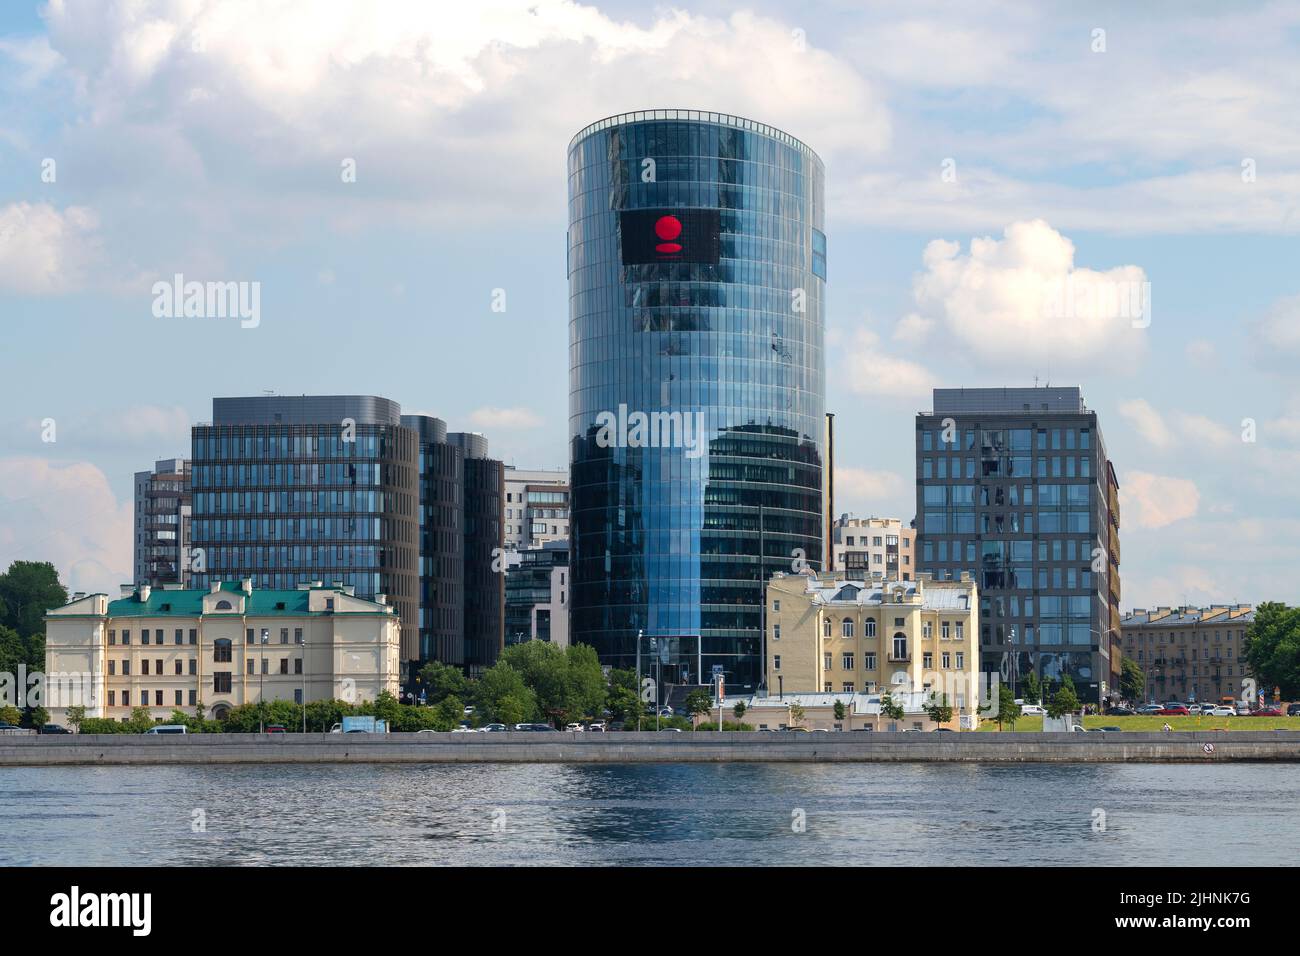 SAINT PETERSBURG, RUSSIA - JULY 05, 2022: View of the building of the main office of the bank 'St. Petersburg' on a July afternoon Stock Photo